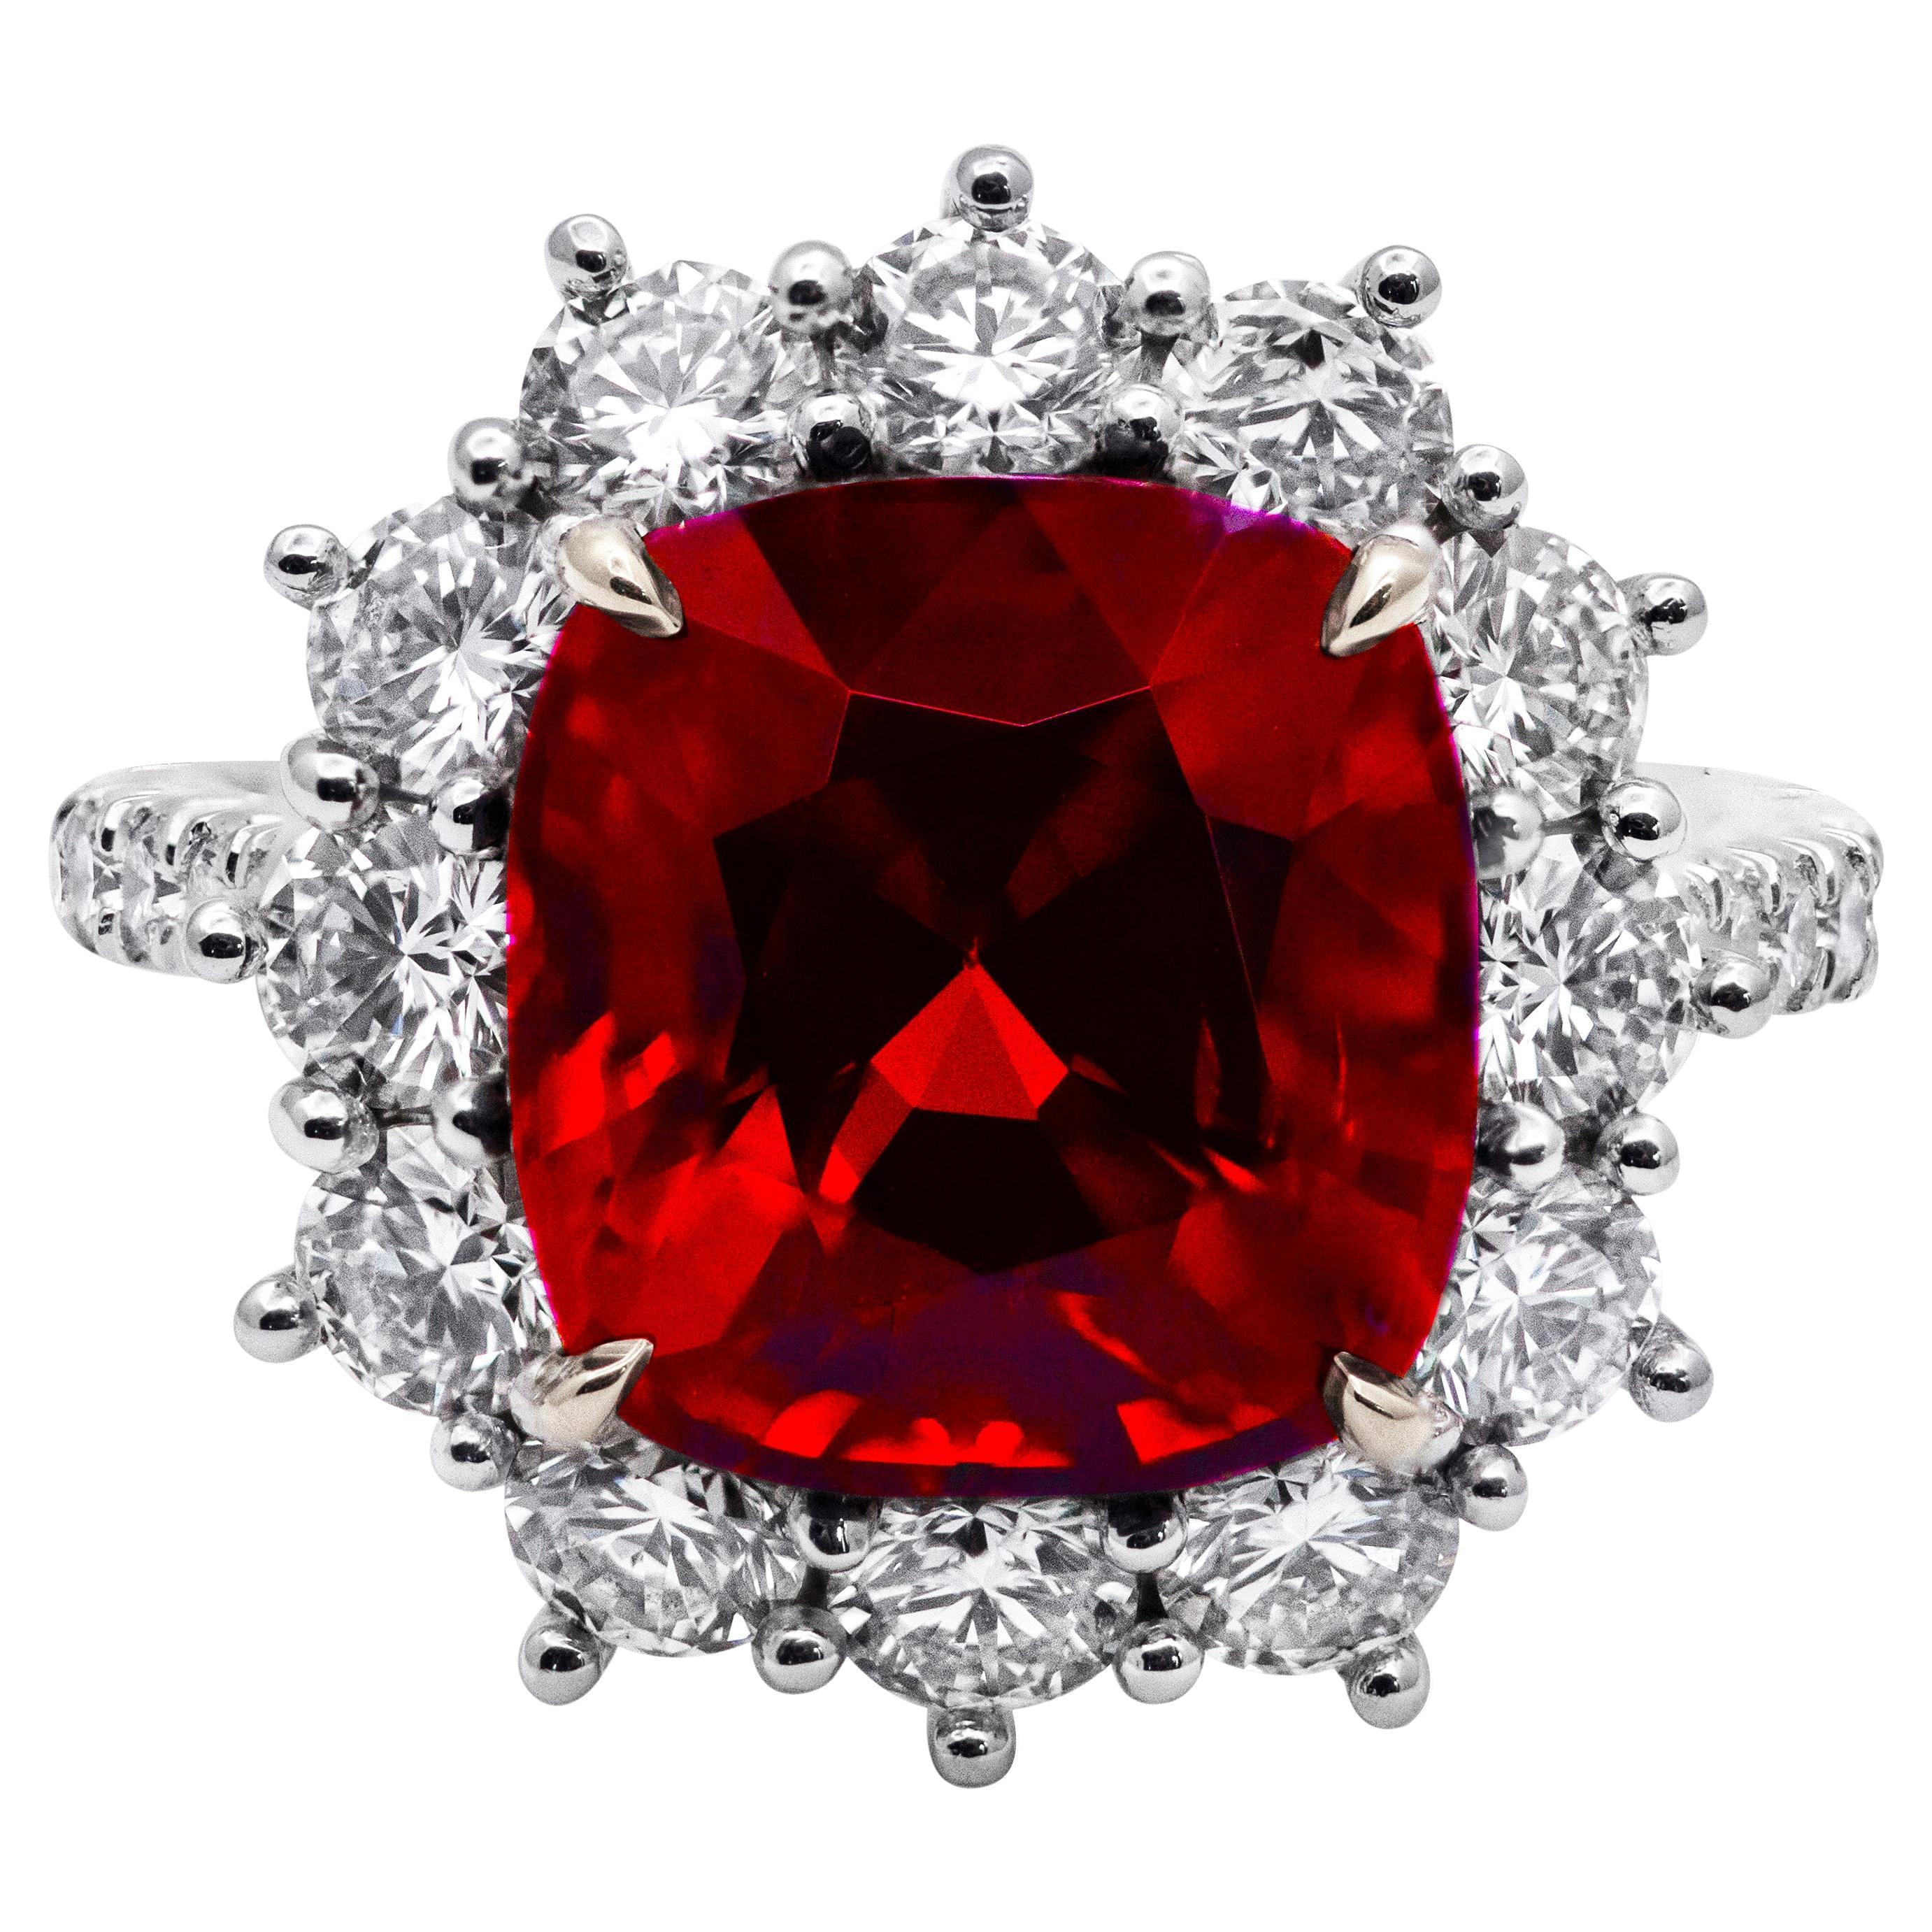 C. Dunaigre 6.92 Carats Cushion Cut Red Spinel and Diamond Halo Cocktail Ring For Sale